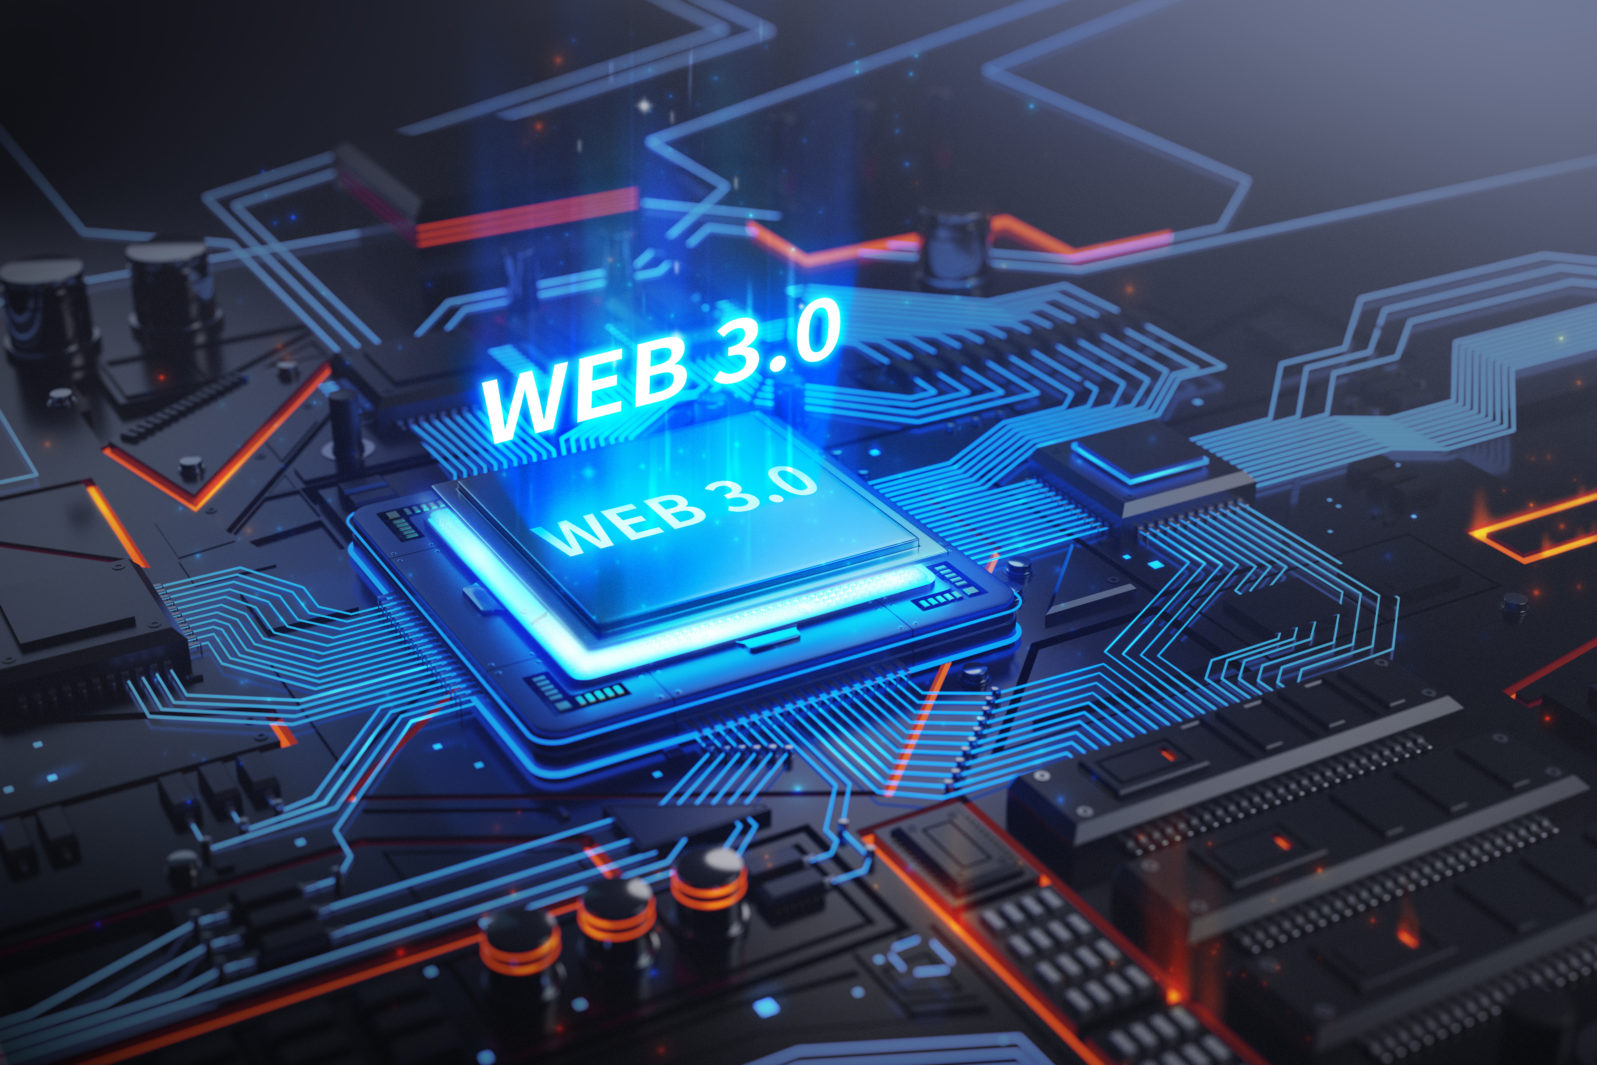 WEB 3.0 abstract sign with blockchain 3d illustration